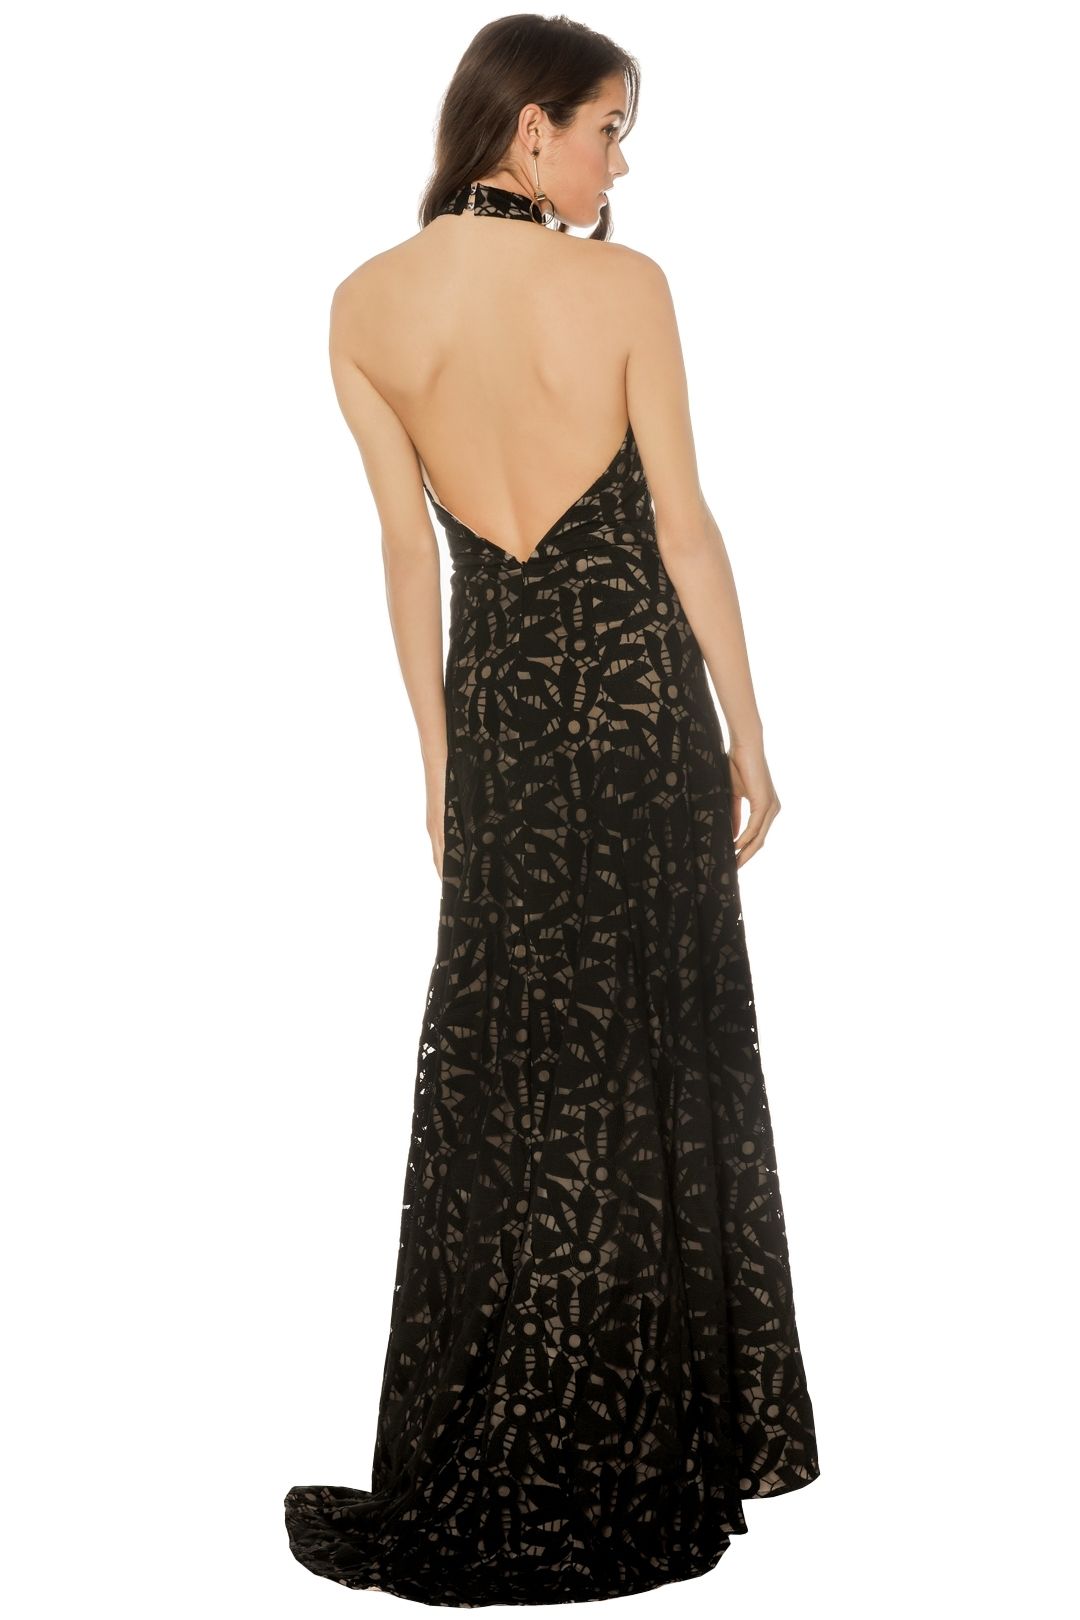 Cooper St - Lady of Venice High Neck Gown - Black - Back